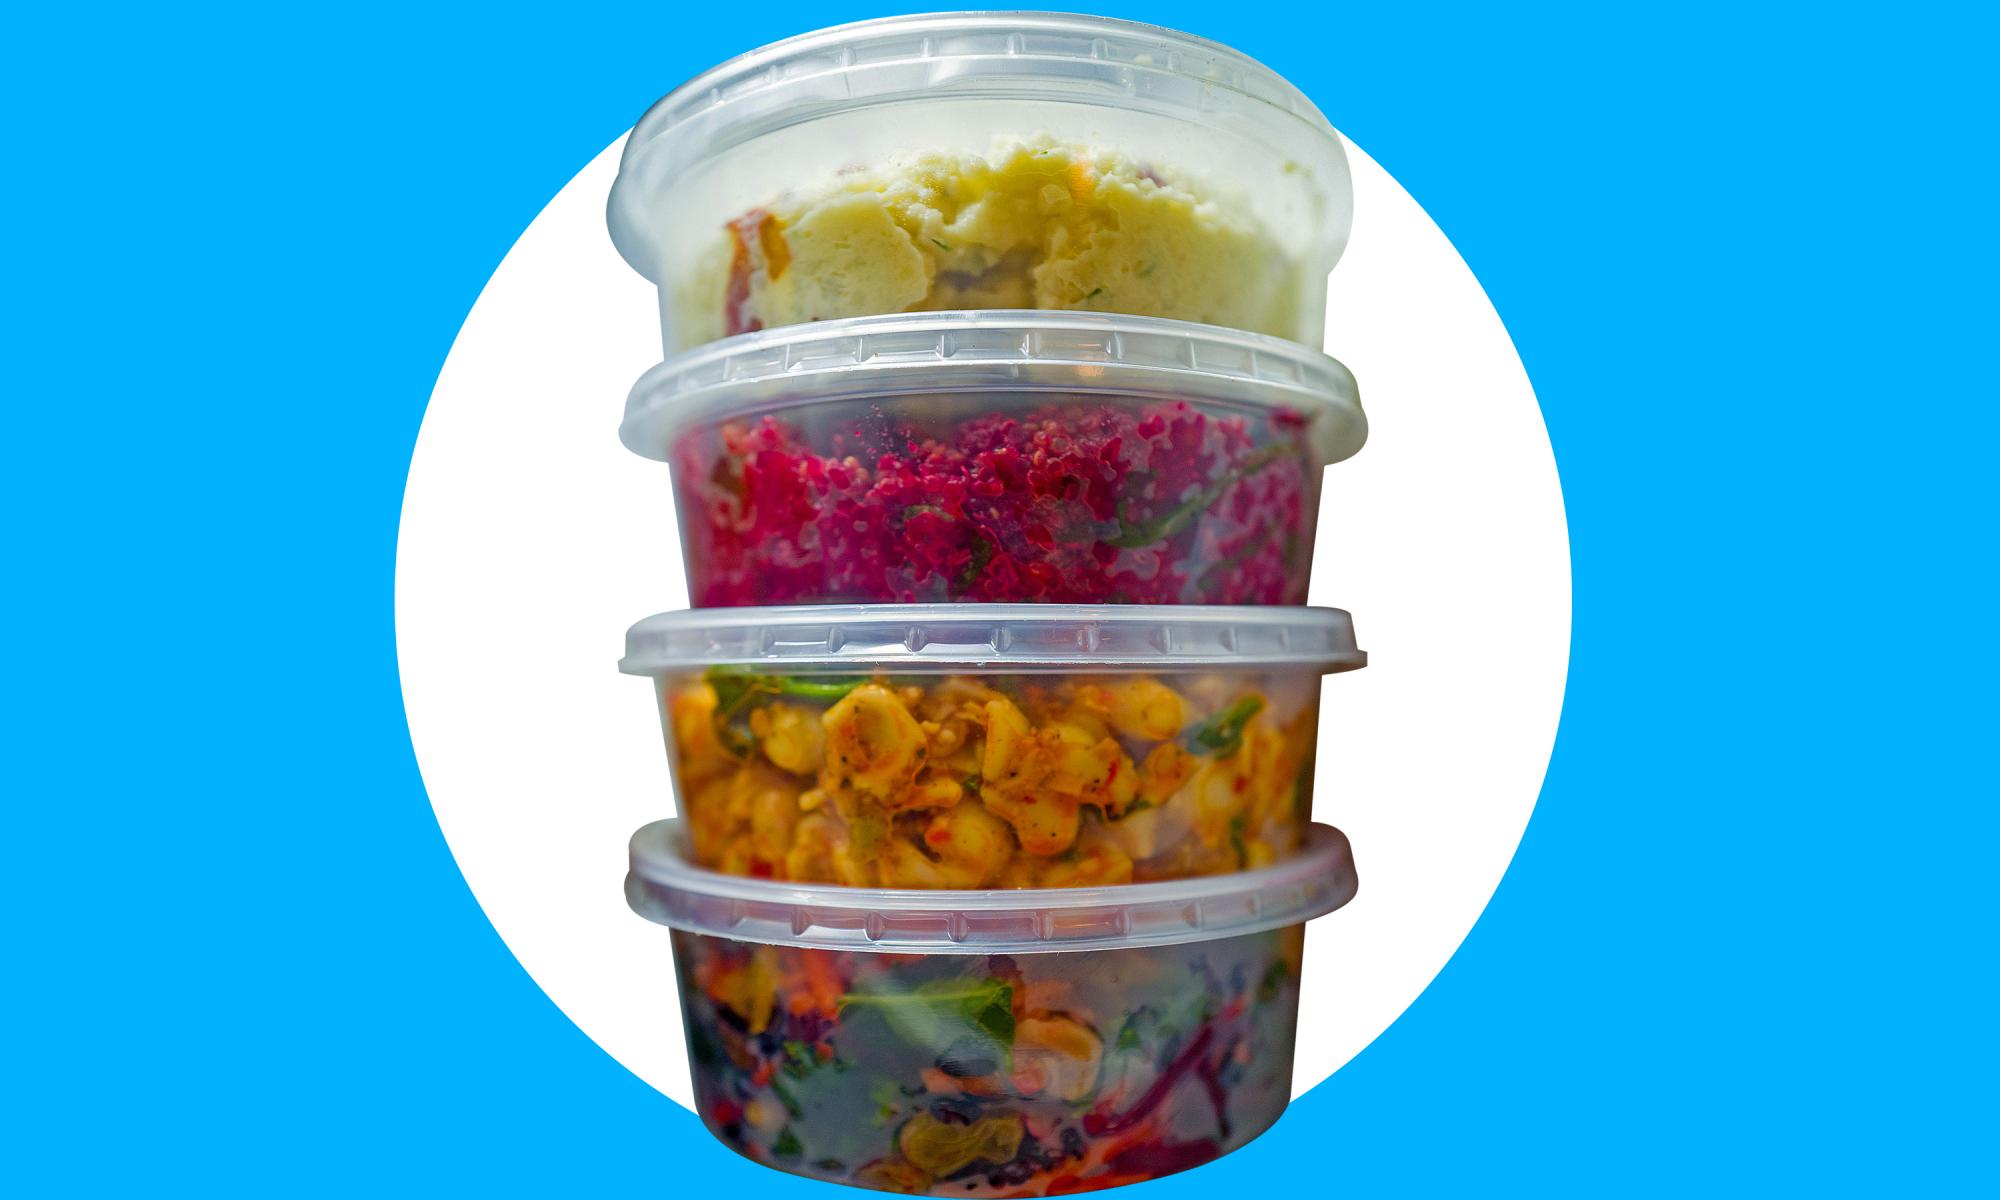 Are plastic containers safe for our food?